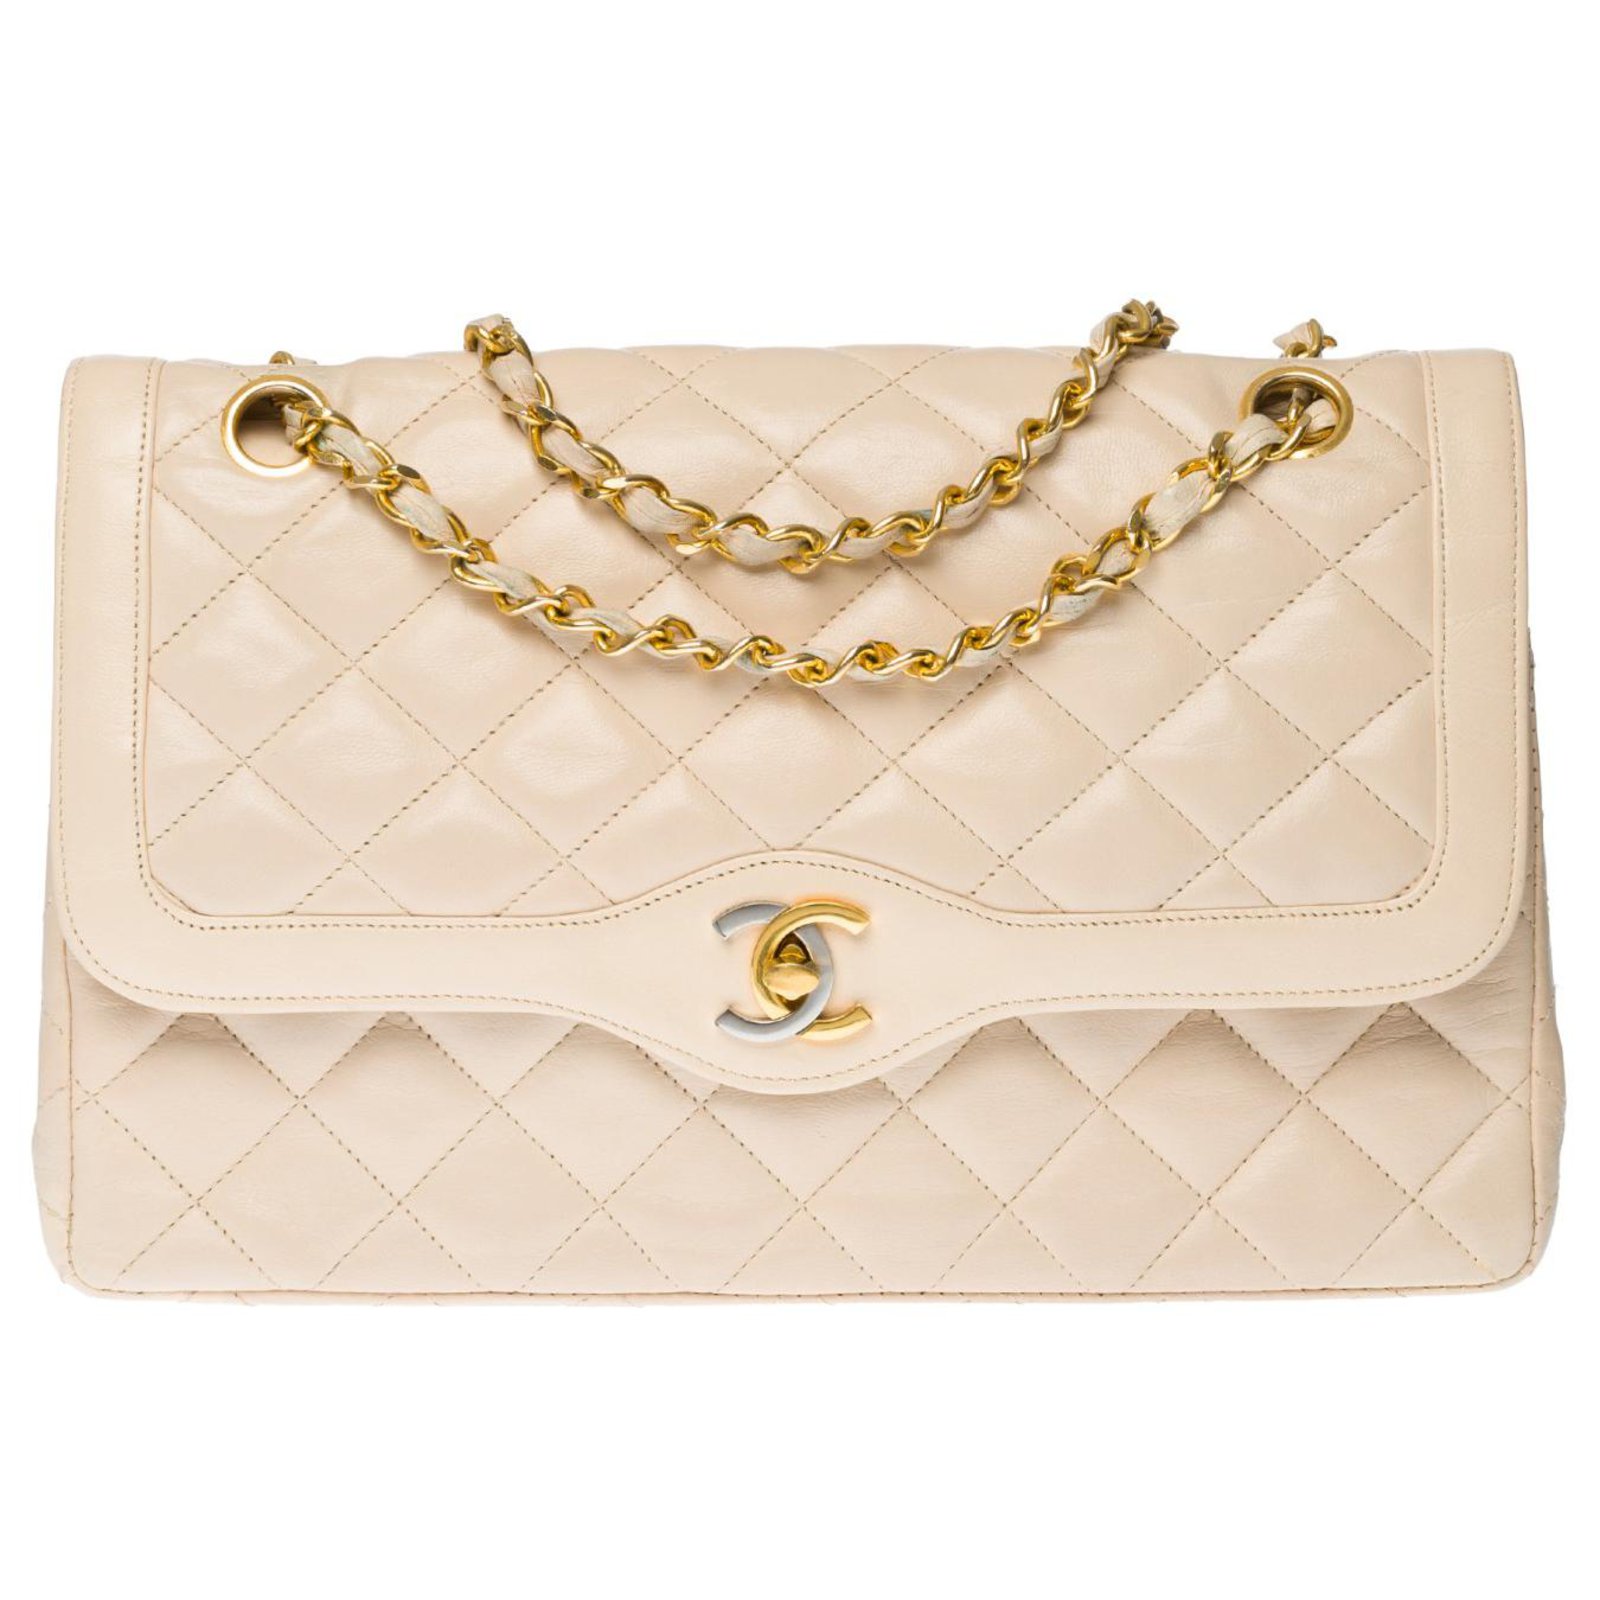 Very Rare Chanel Timeless / Classique lined flap bag in beige